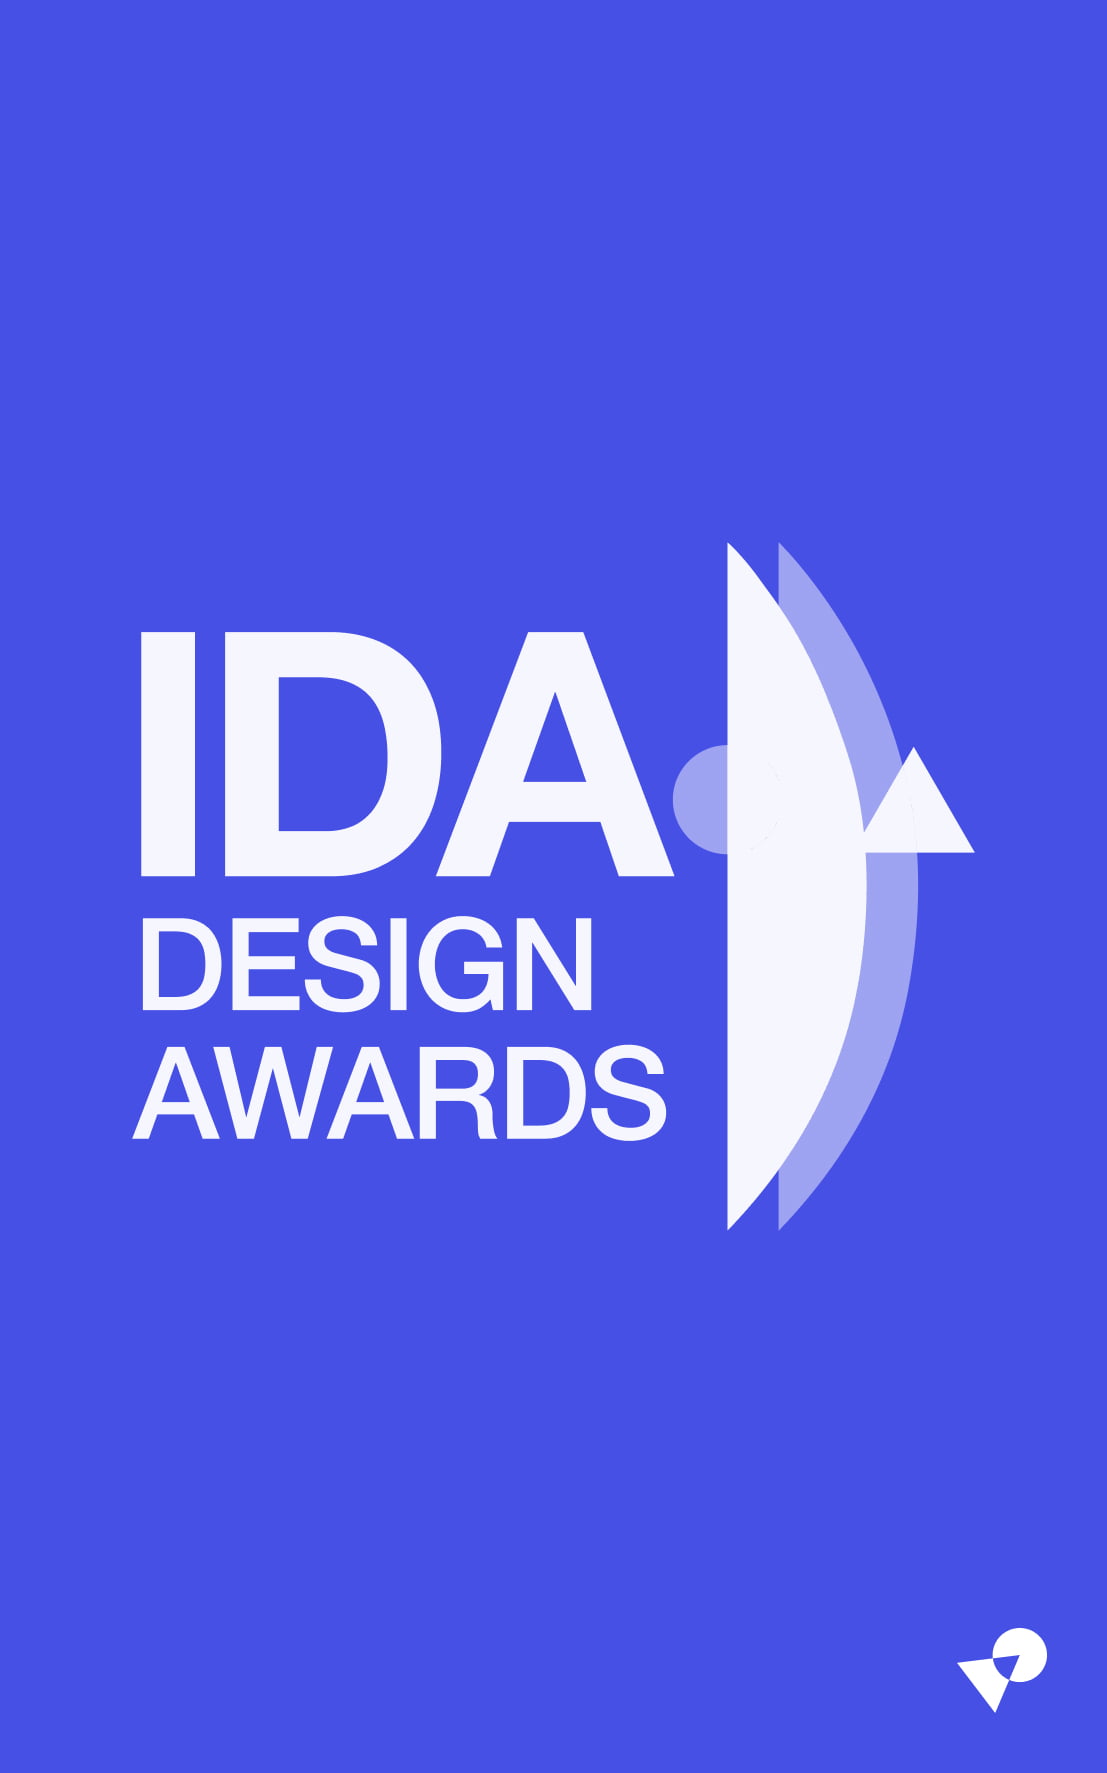 Opinov8 Honorable Mentioned by IDA Design Awards 2022